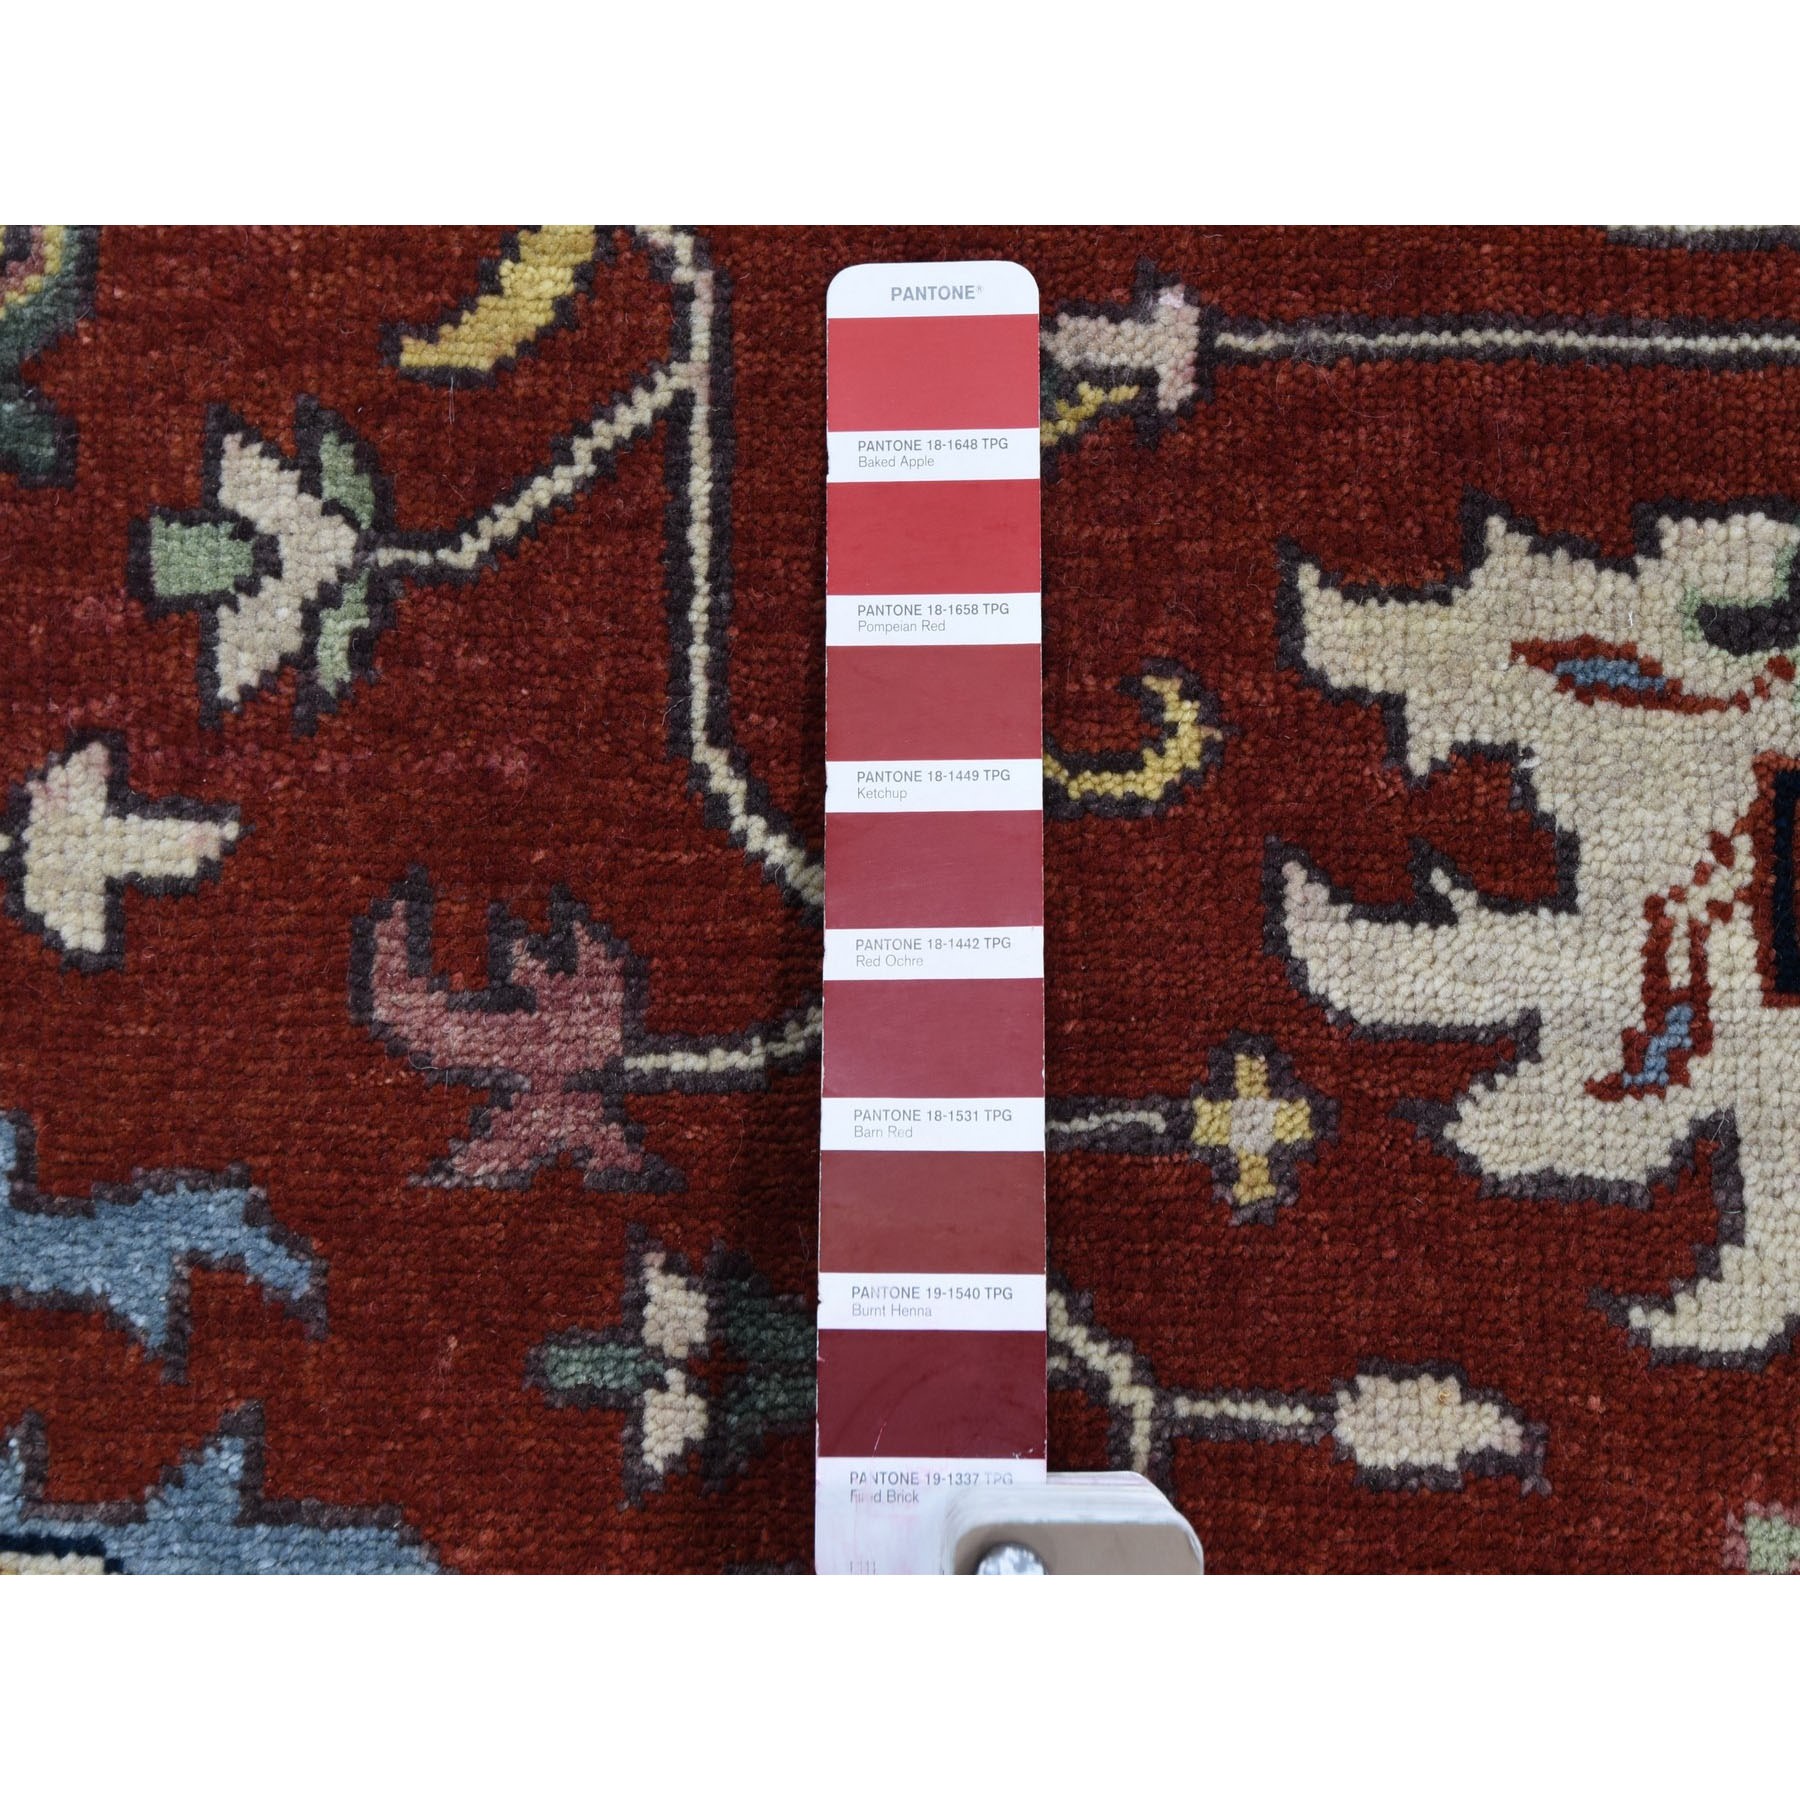 8-x8- Round Red Heriz Revival Pure Wool Hand Knotted Oriental Rug 